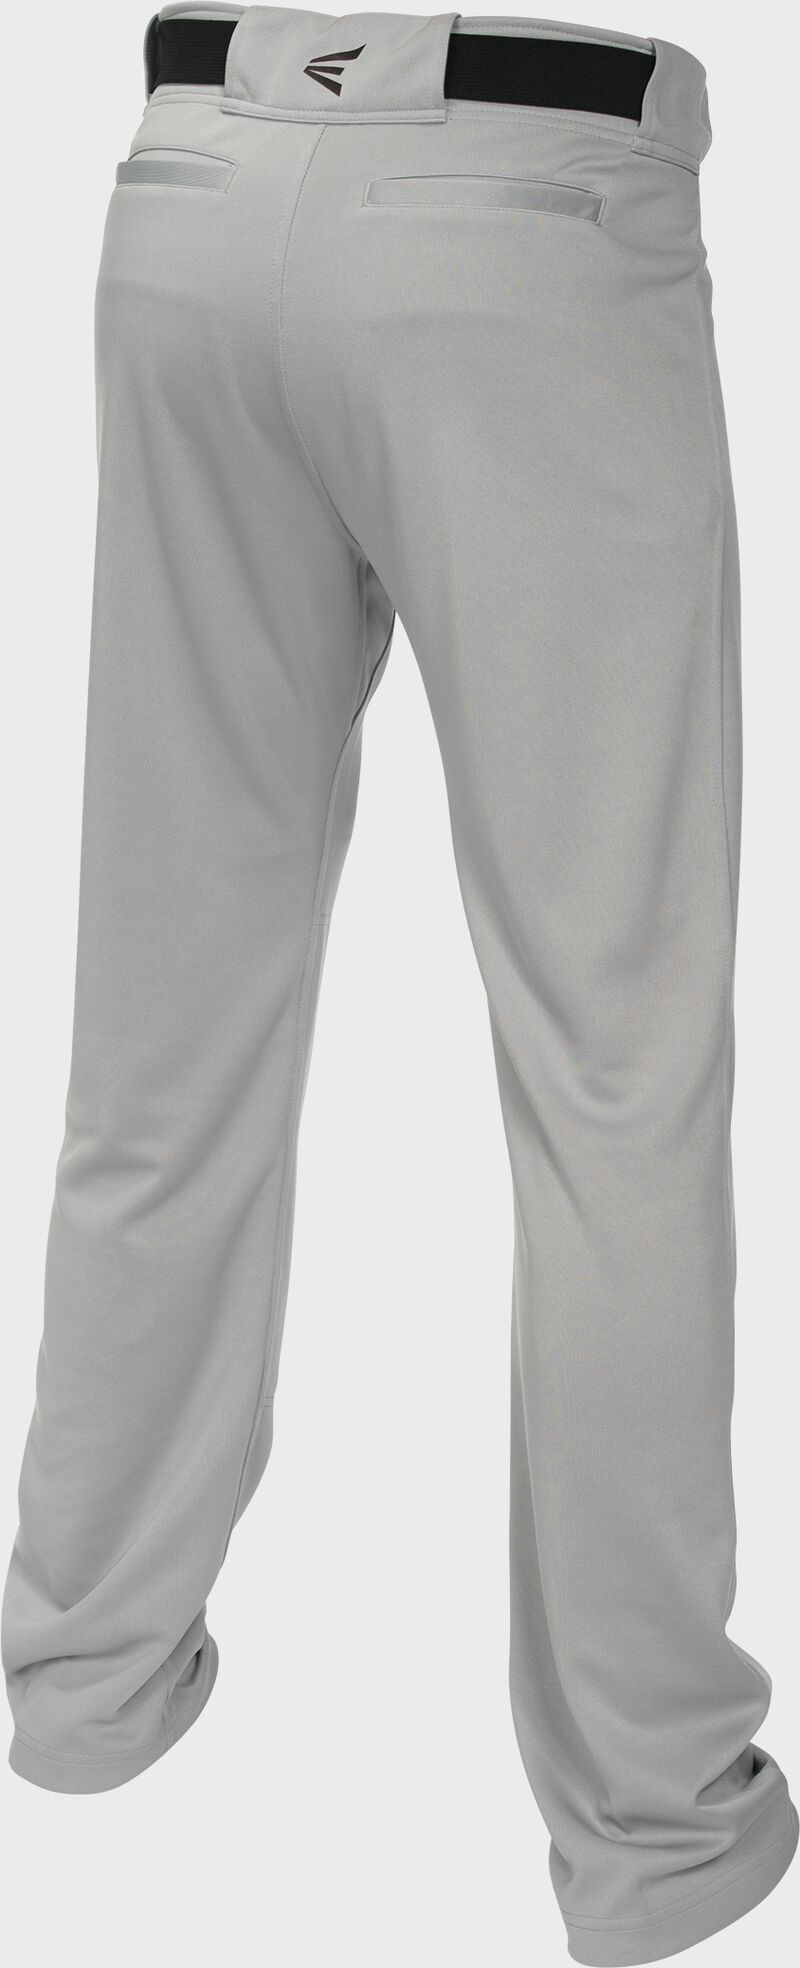 Mako 2 Pant Youth Solid GREY  L image number null